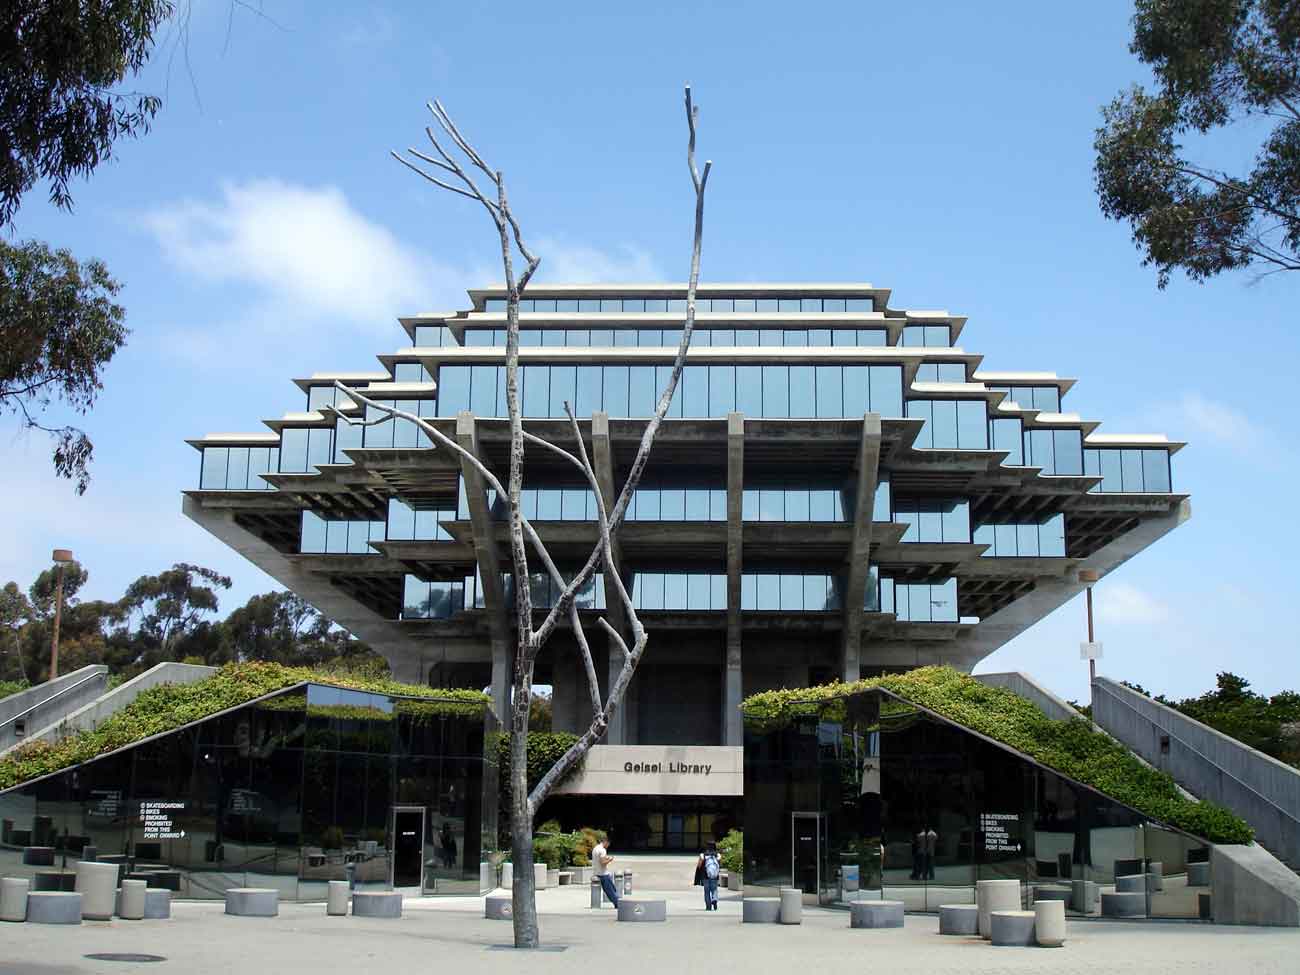 Academic brutalist architecture: geisel library, university of california, san diego, usa - designed by william pereira, opened in 1970. - © belis@rio